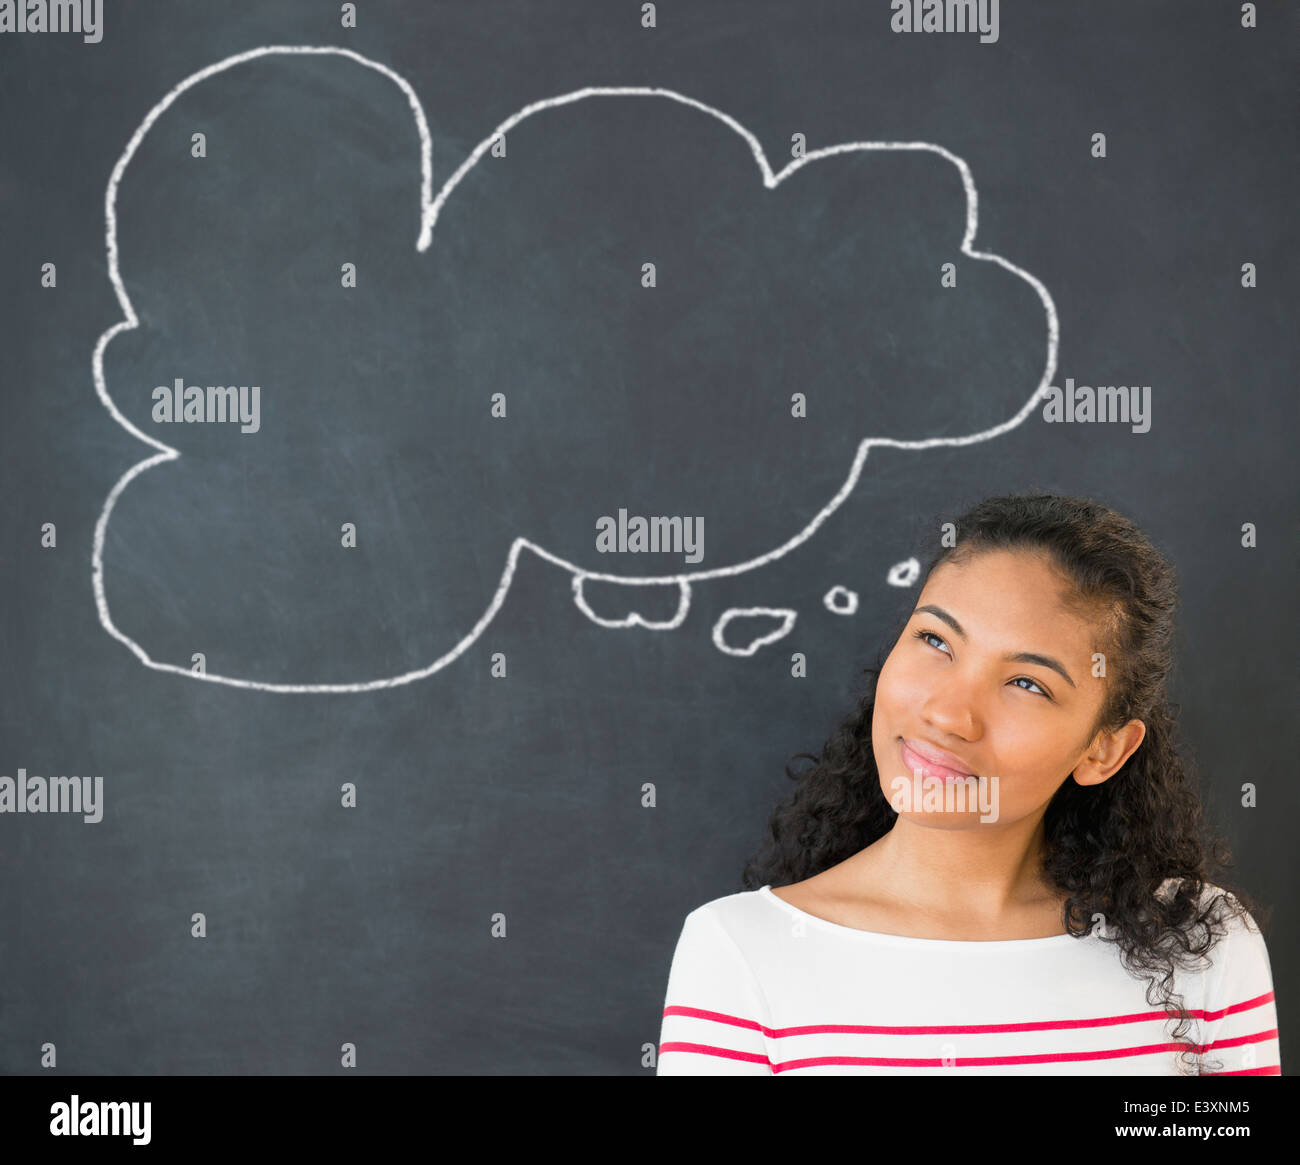 Mixed race woman under thought bubble on chalkboard Stock Photo